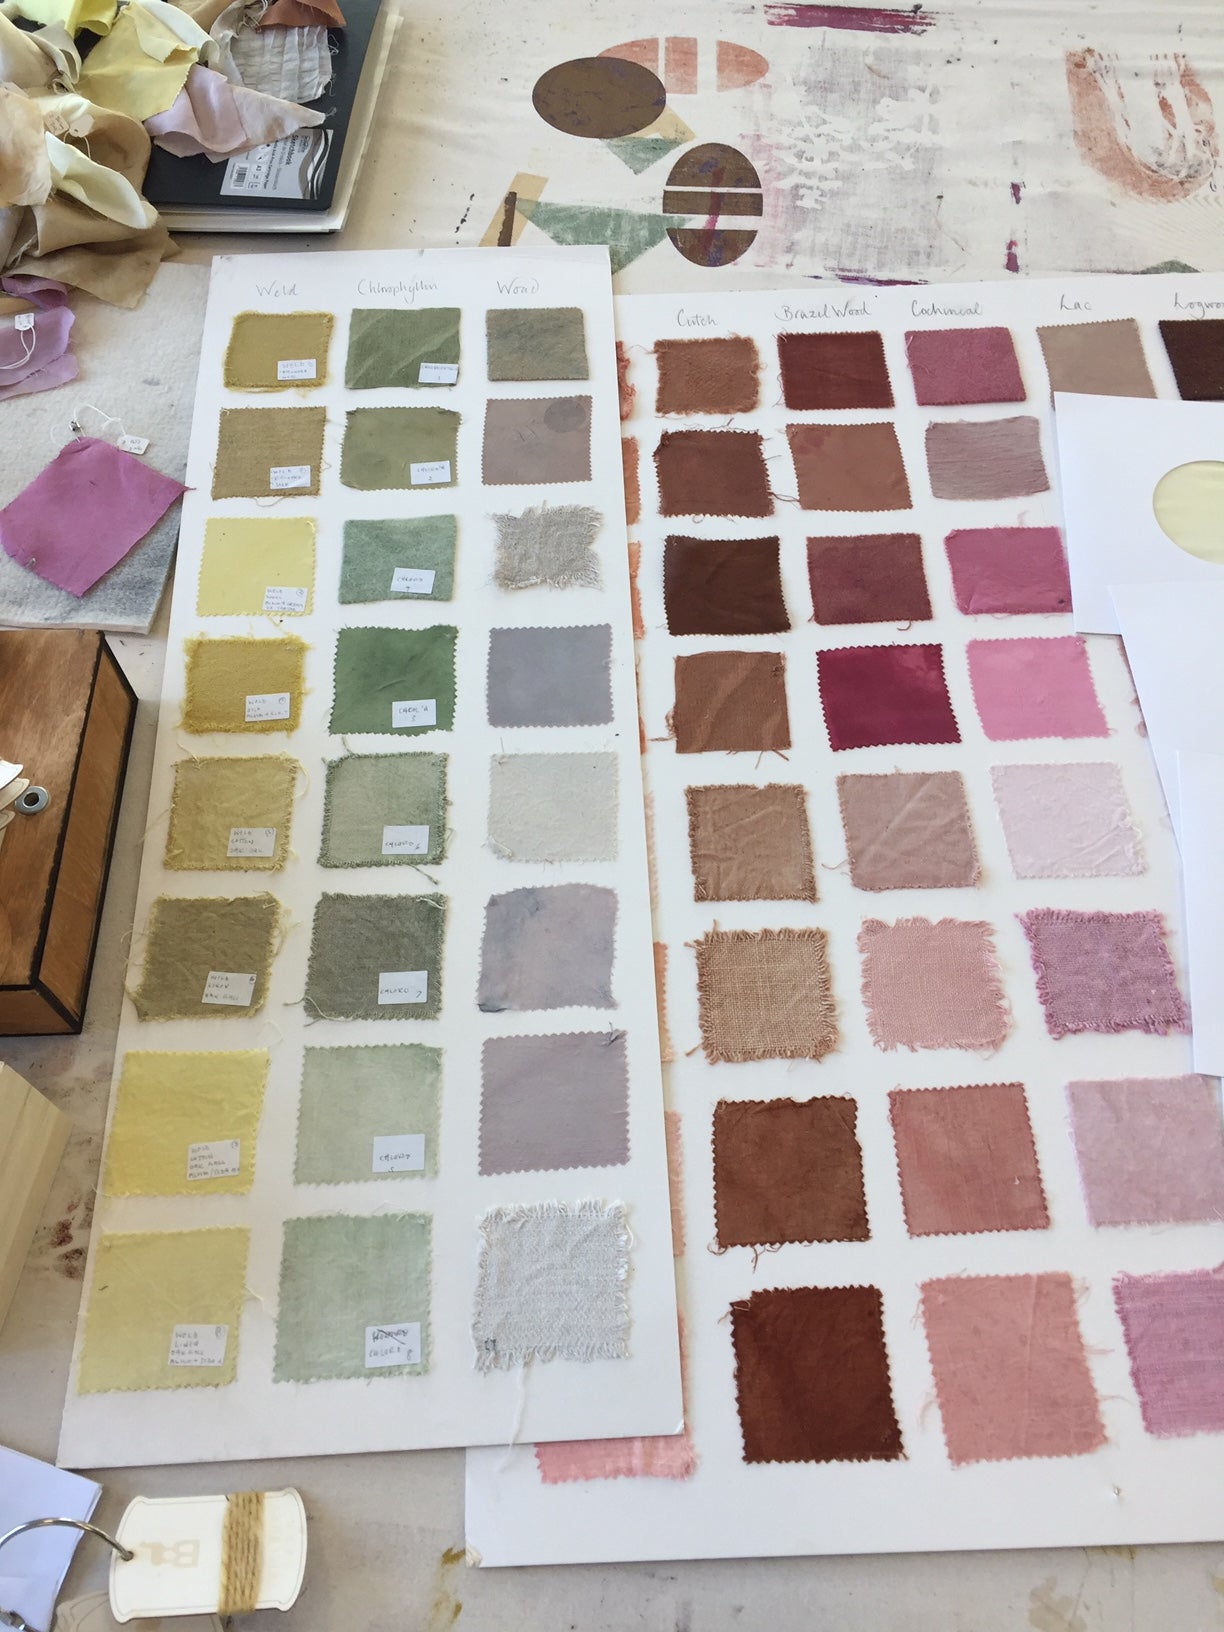 Natural dye swatches created by Kate Turnbull